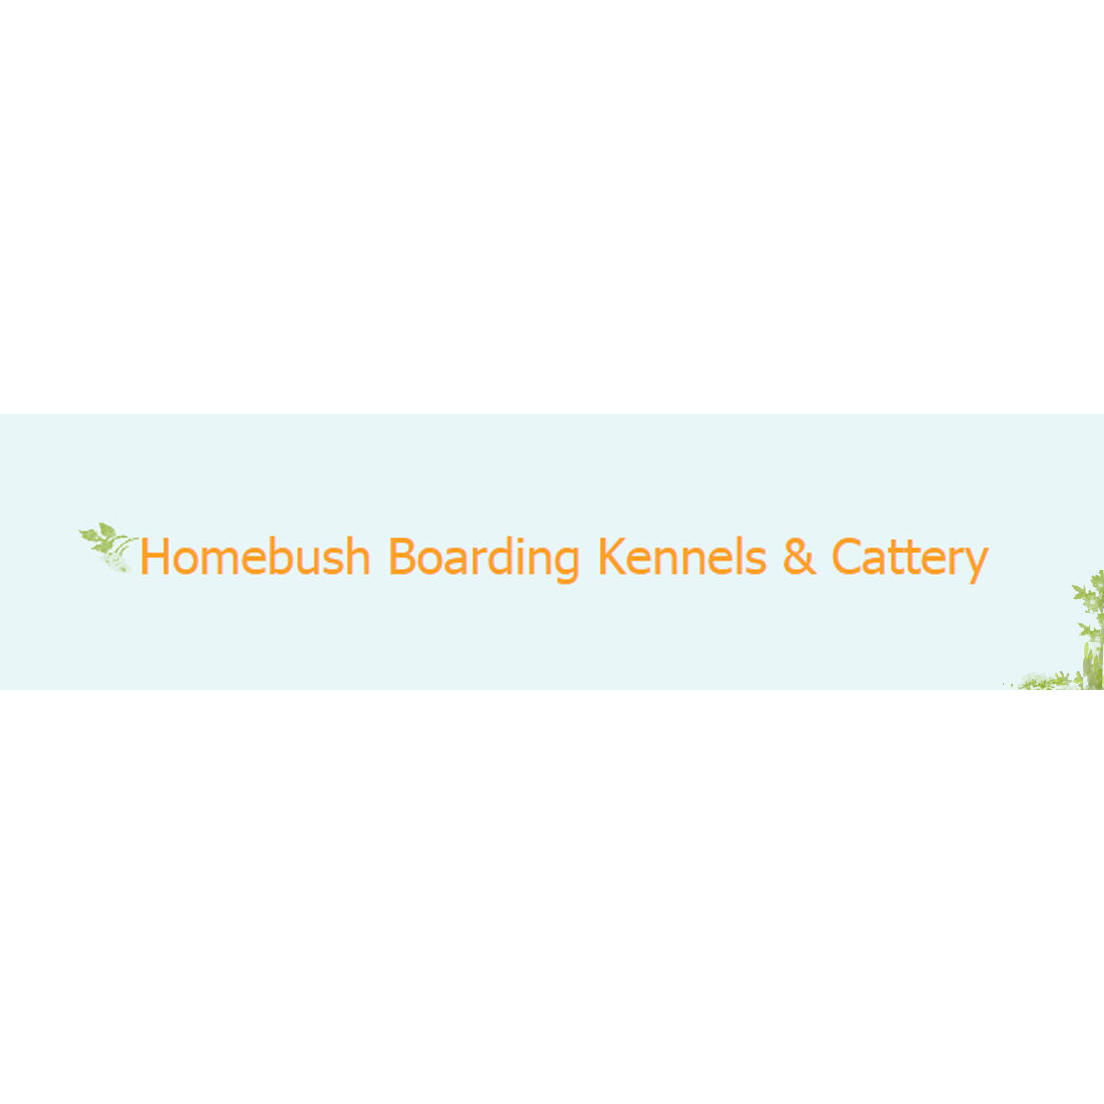 Homebush Boarding Kennels & Cattery Victoria Plains